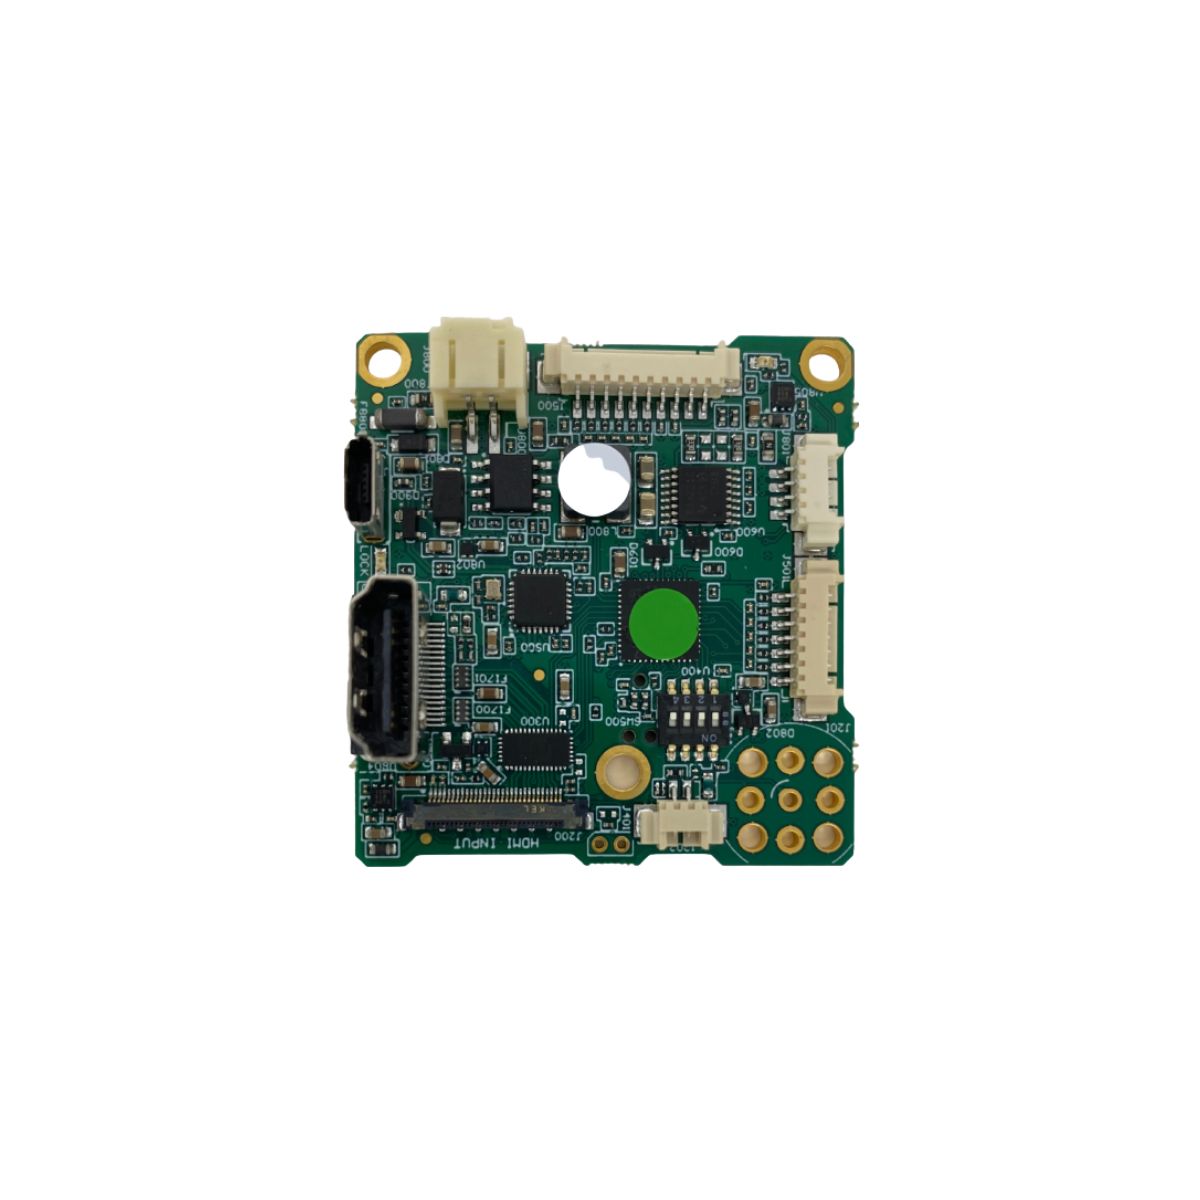 HDMI 4K Interface Boards for 4K Block Cameras Top View